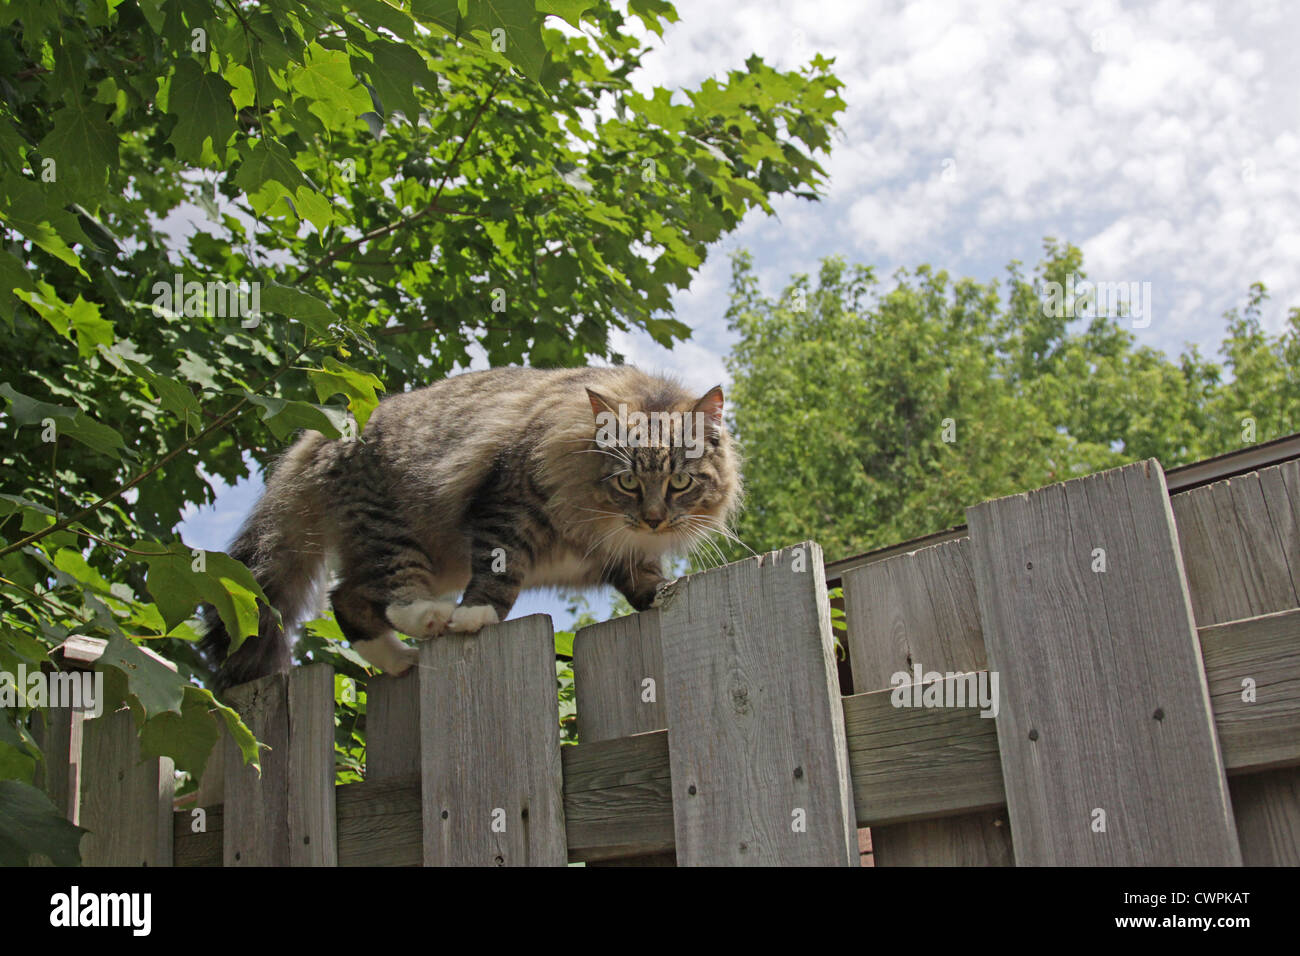 Prowling Cat on Fence Stock Photo